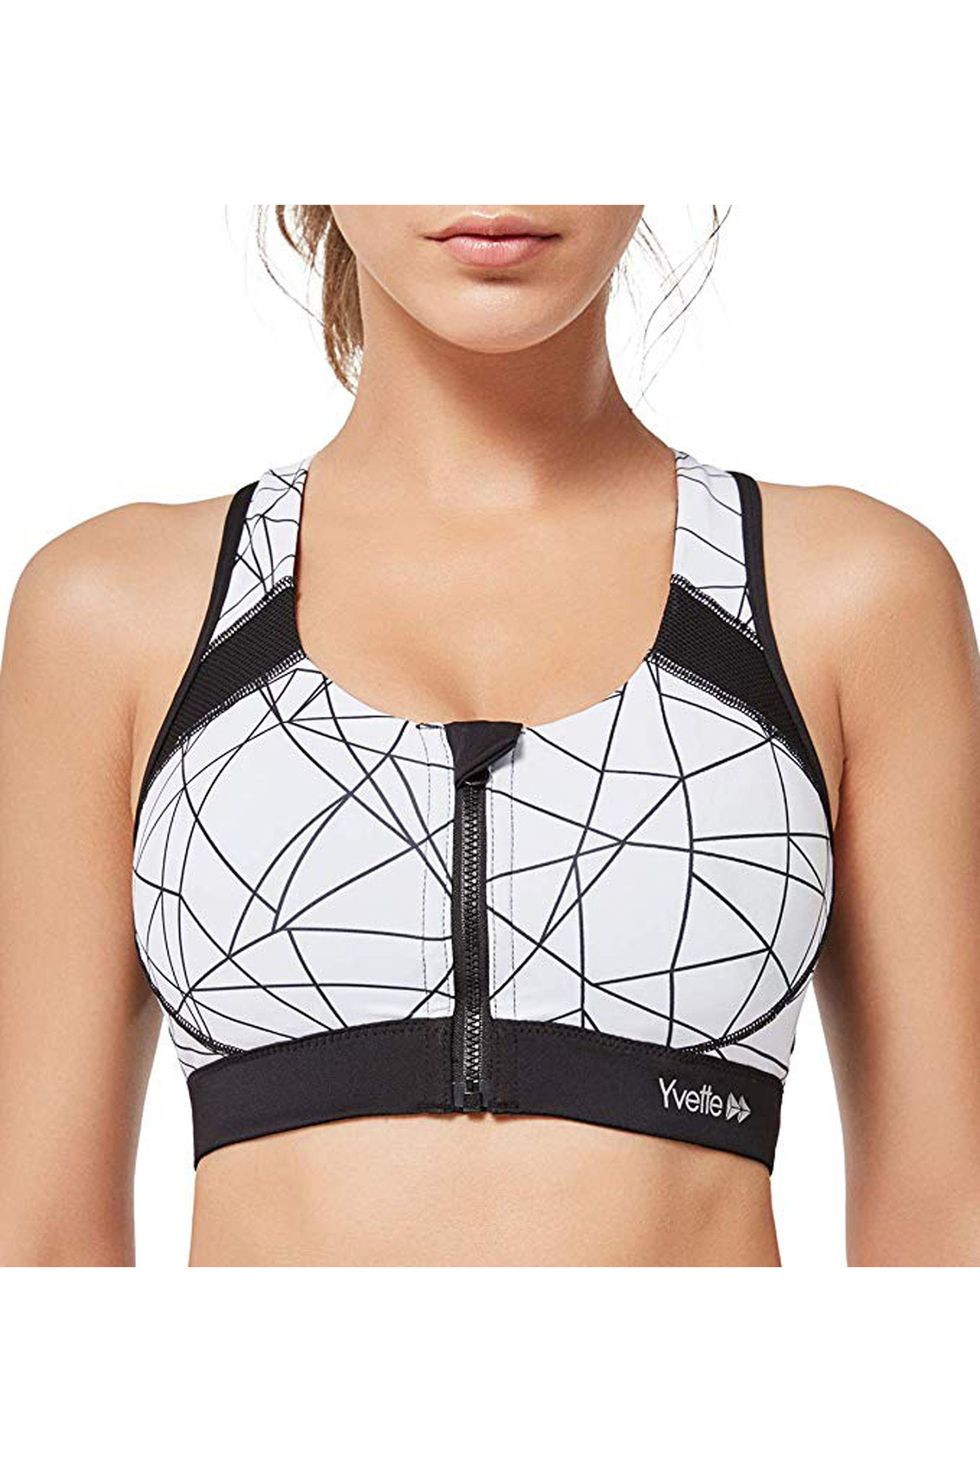 15 Fancy Sports Bras You'll Never Want to Cover Up - Brit + Co